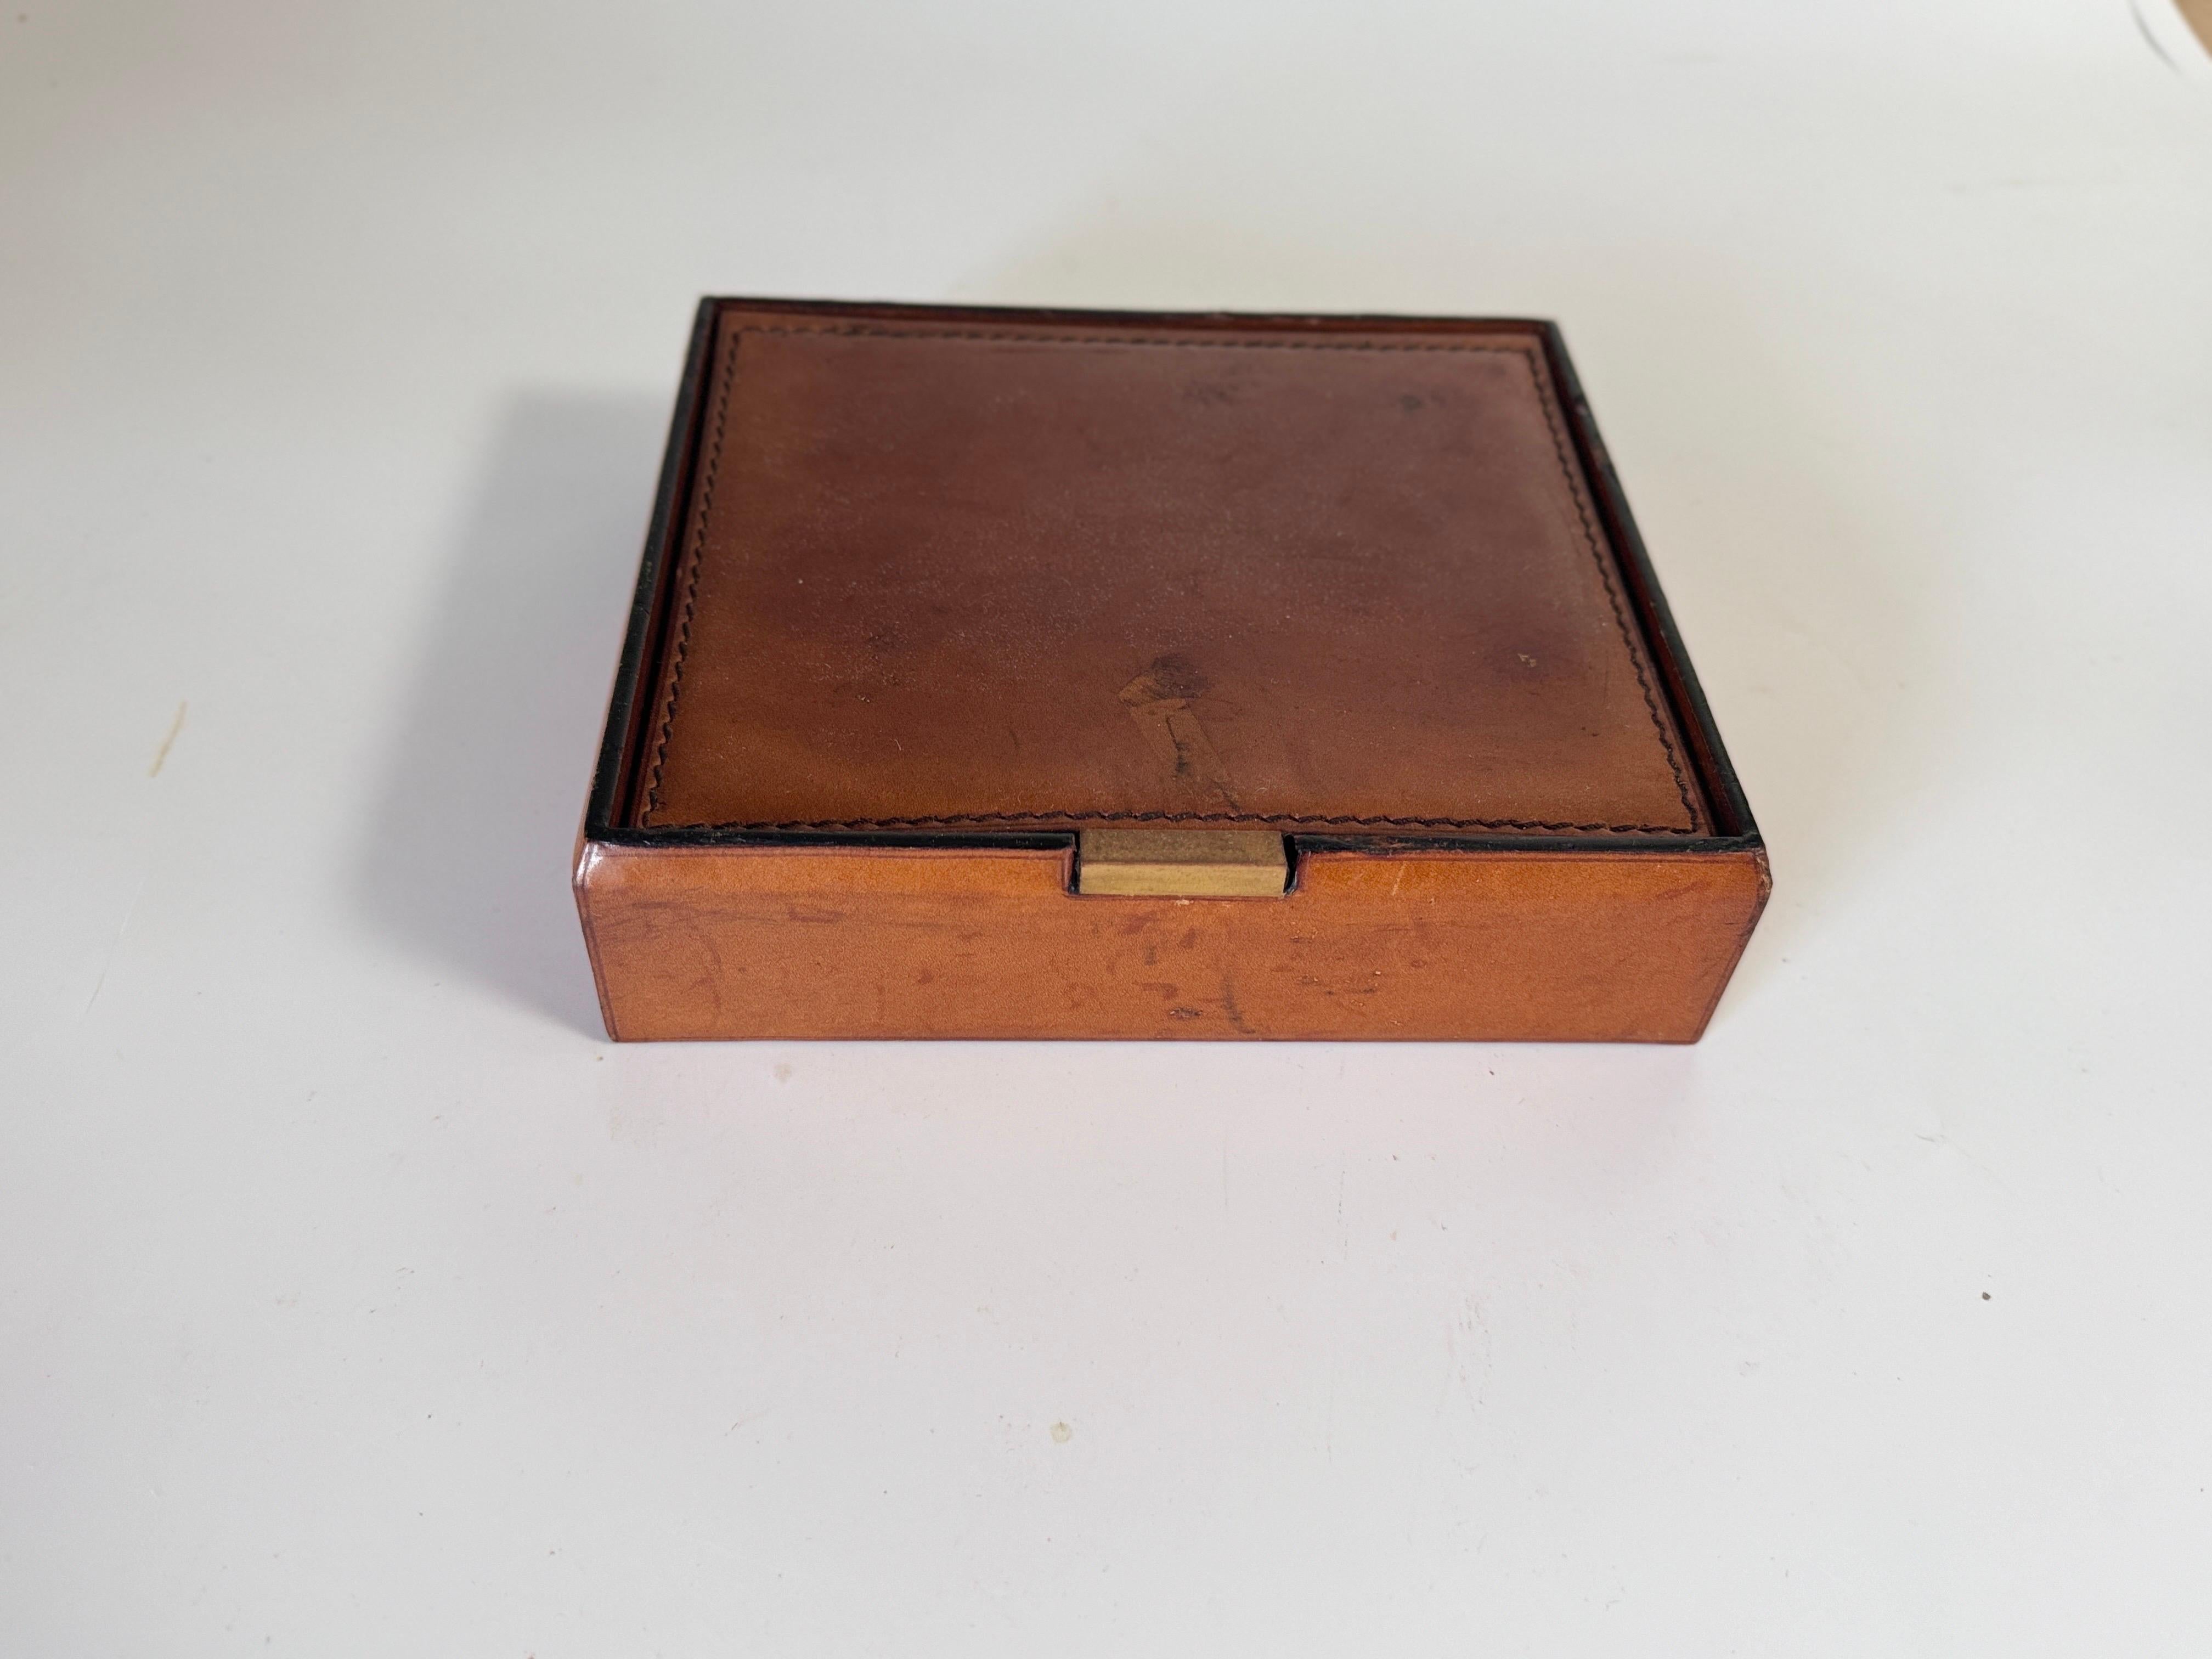 Leather Covered Tobacco Box Wood Brown Jacques Adnet Style France 1940 by Lancel For Sale 8